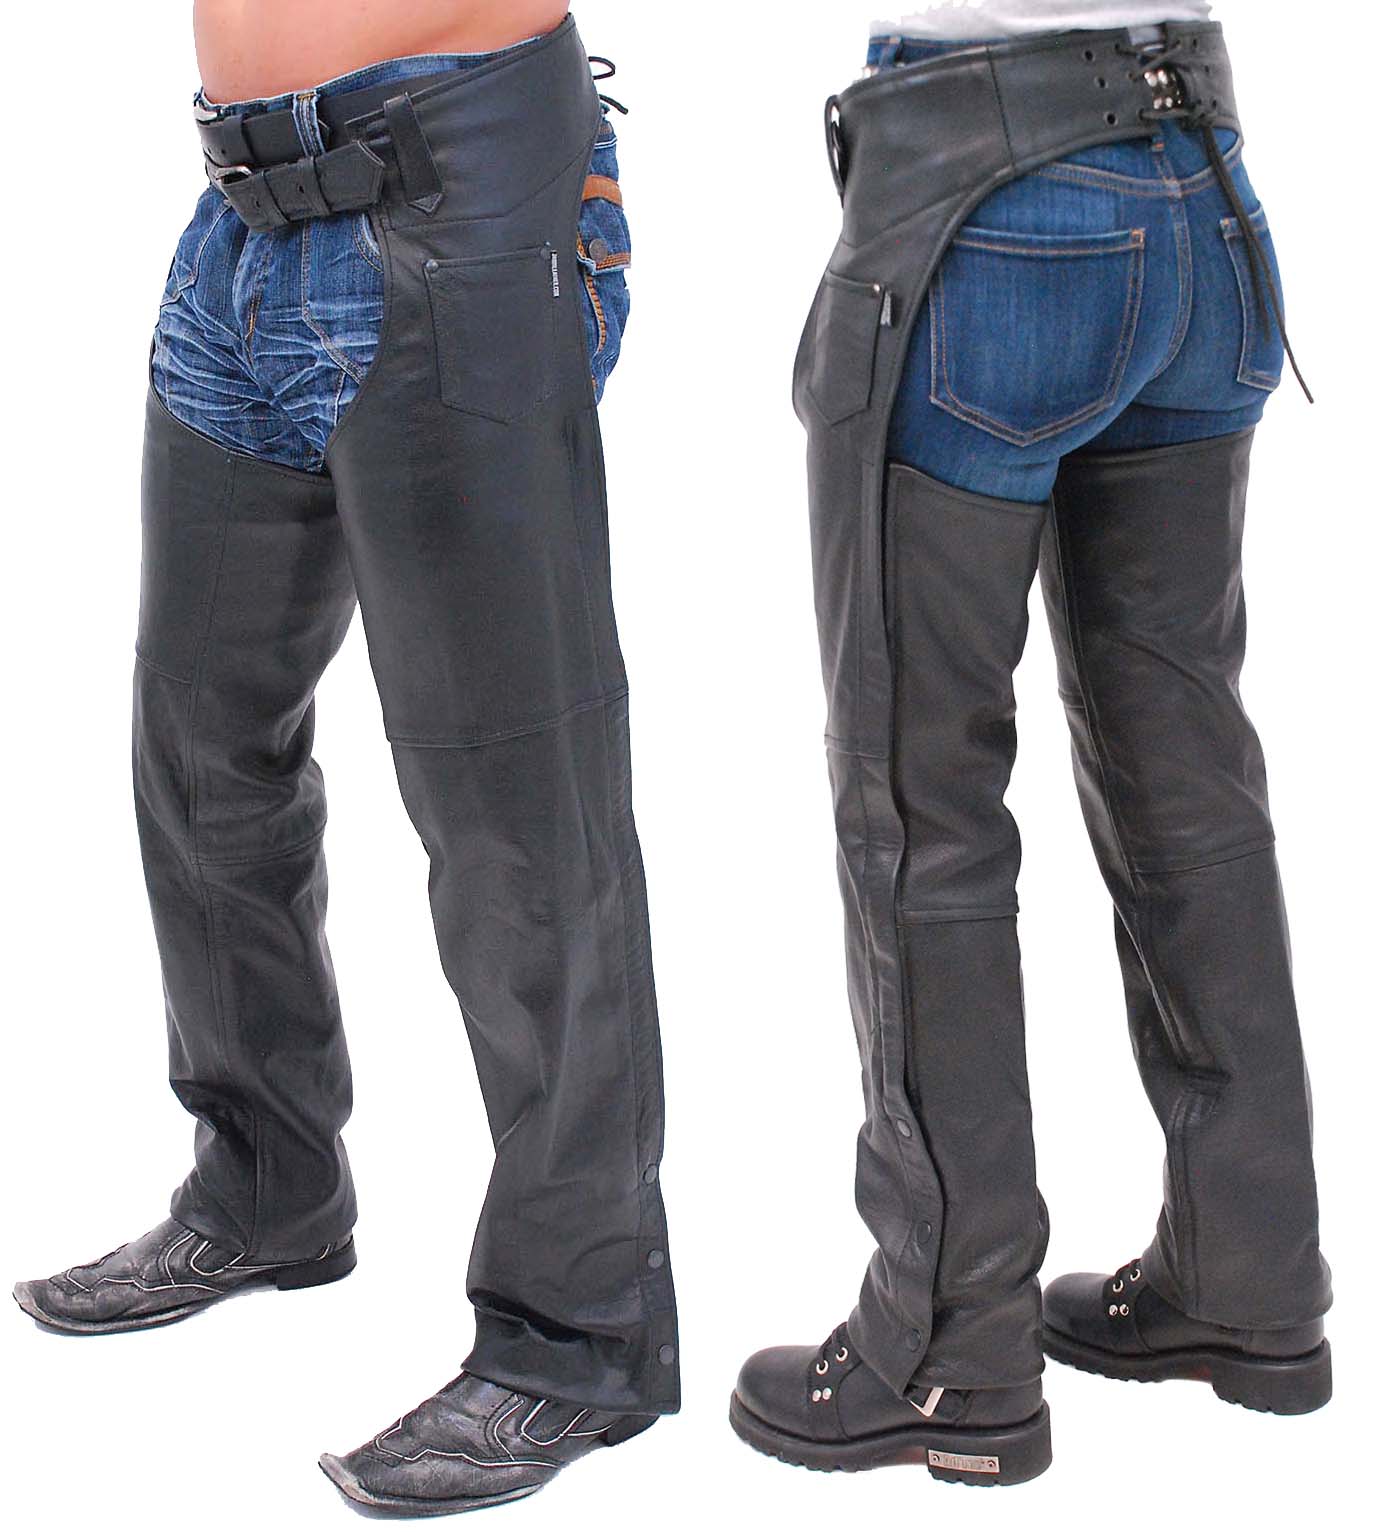 ON SALE LEATHER MOTORCYCLE CHAPS